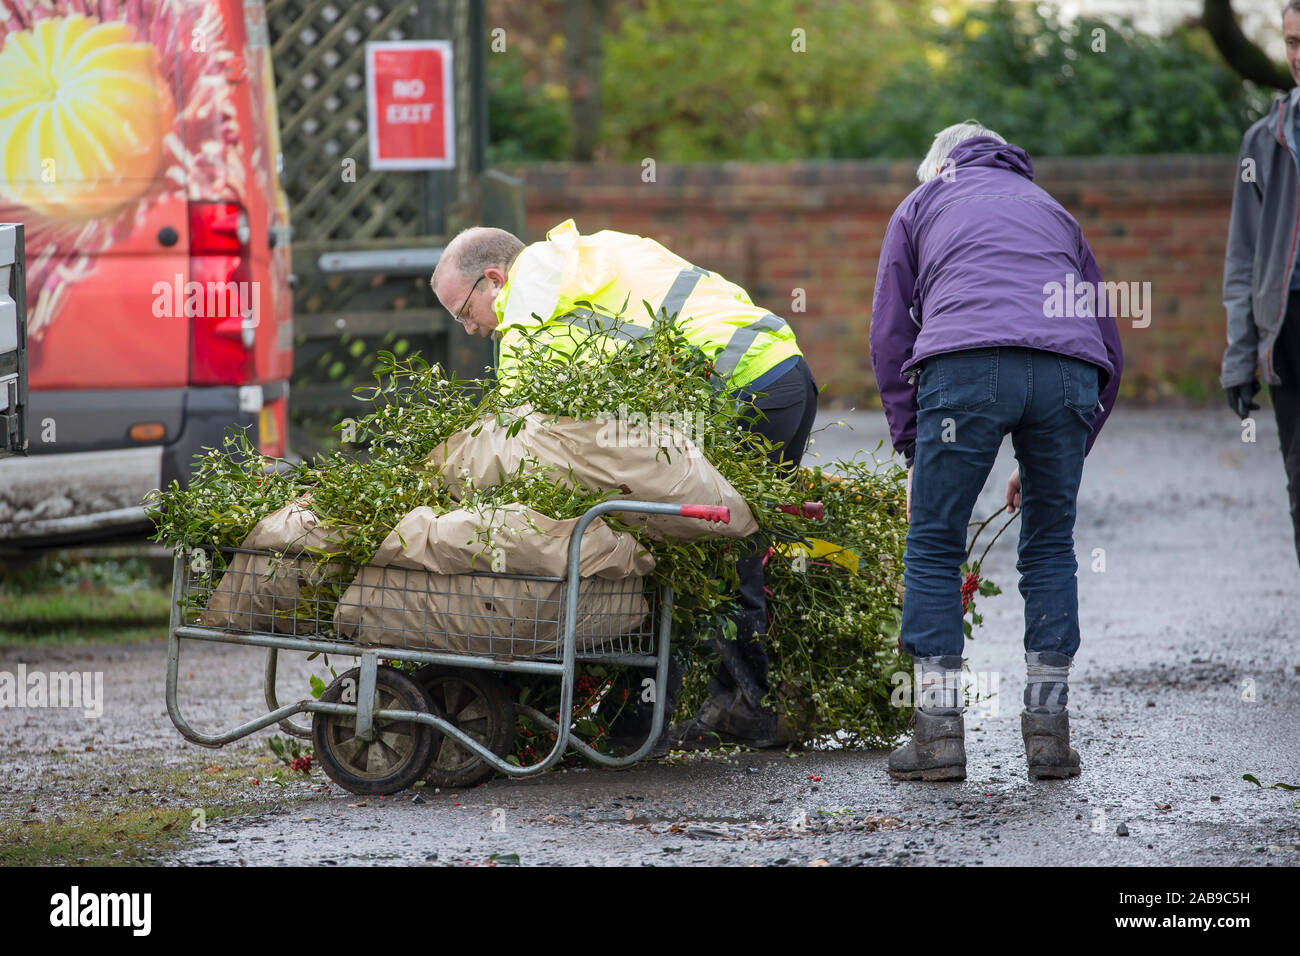 Tenbury Wells, UK. 26th Nov, 2019. In spite of continual wet and dreary weather, nothing dampens the spirit of these UK buyers as they flock to the Worcestershire town of Tenbury Wells for the annual Mistletoe and Holly Auction. With UK growers offering a staggering selection of freshly-cut, berry-laden lots at this special event, retailers travel from far and wide to secure the finest festive foliage for their business' countdown to Christmas. Buyers return to their vehicles, trollies overflowing with successful purchases of premium evergreens! Credit: Lee Hudson/Alamy Live News Stock Photo